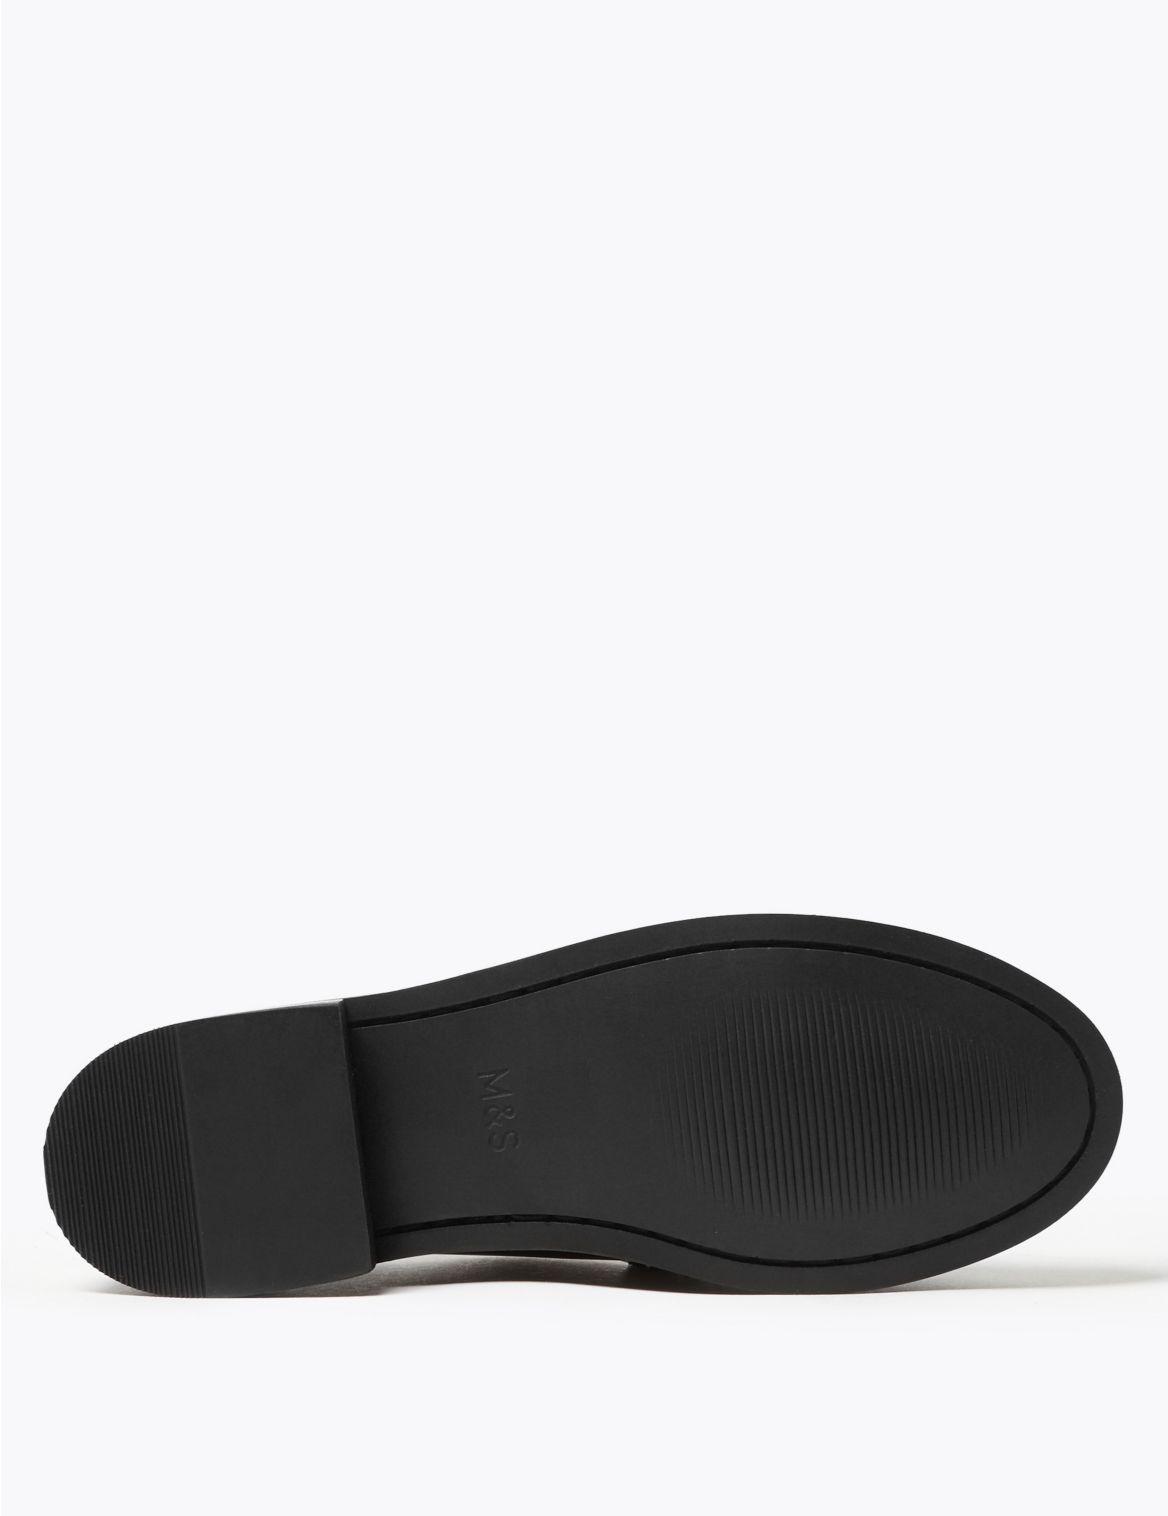 Marks & Spencer Leather Penny Loafers in Black - Lyst